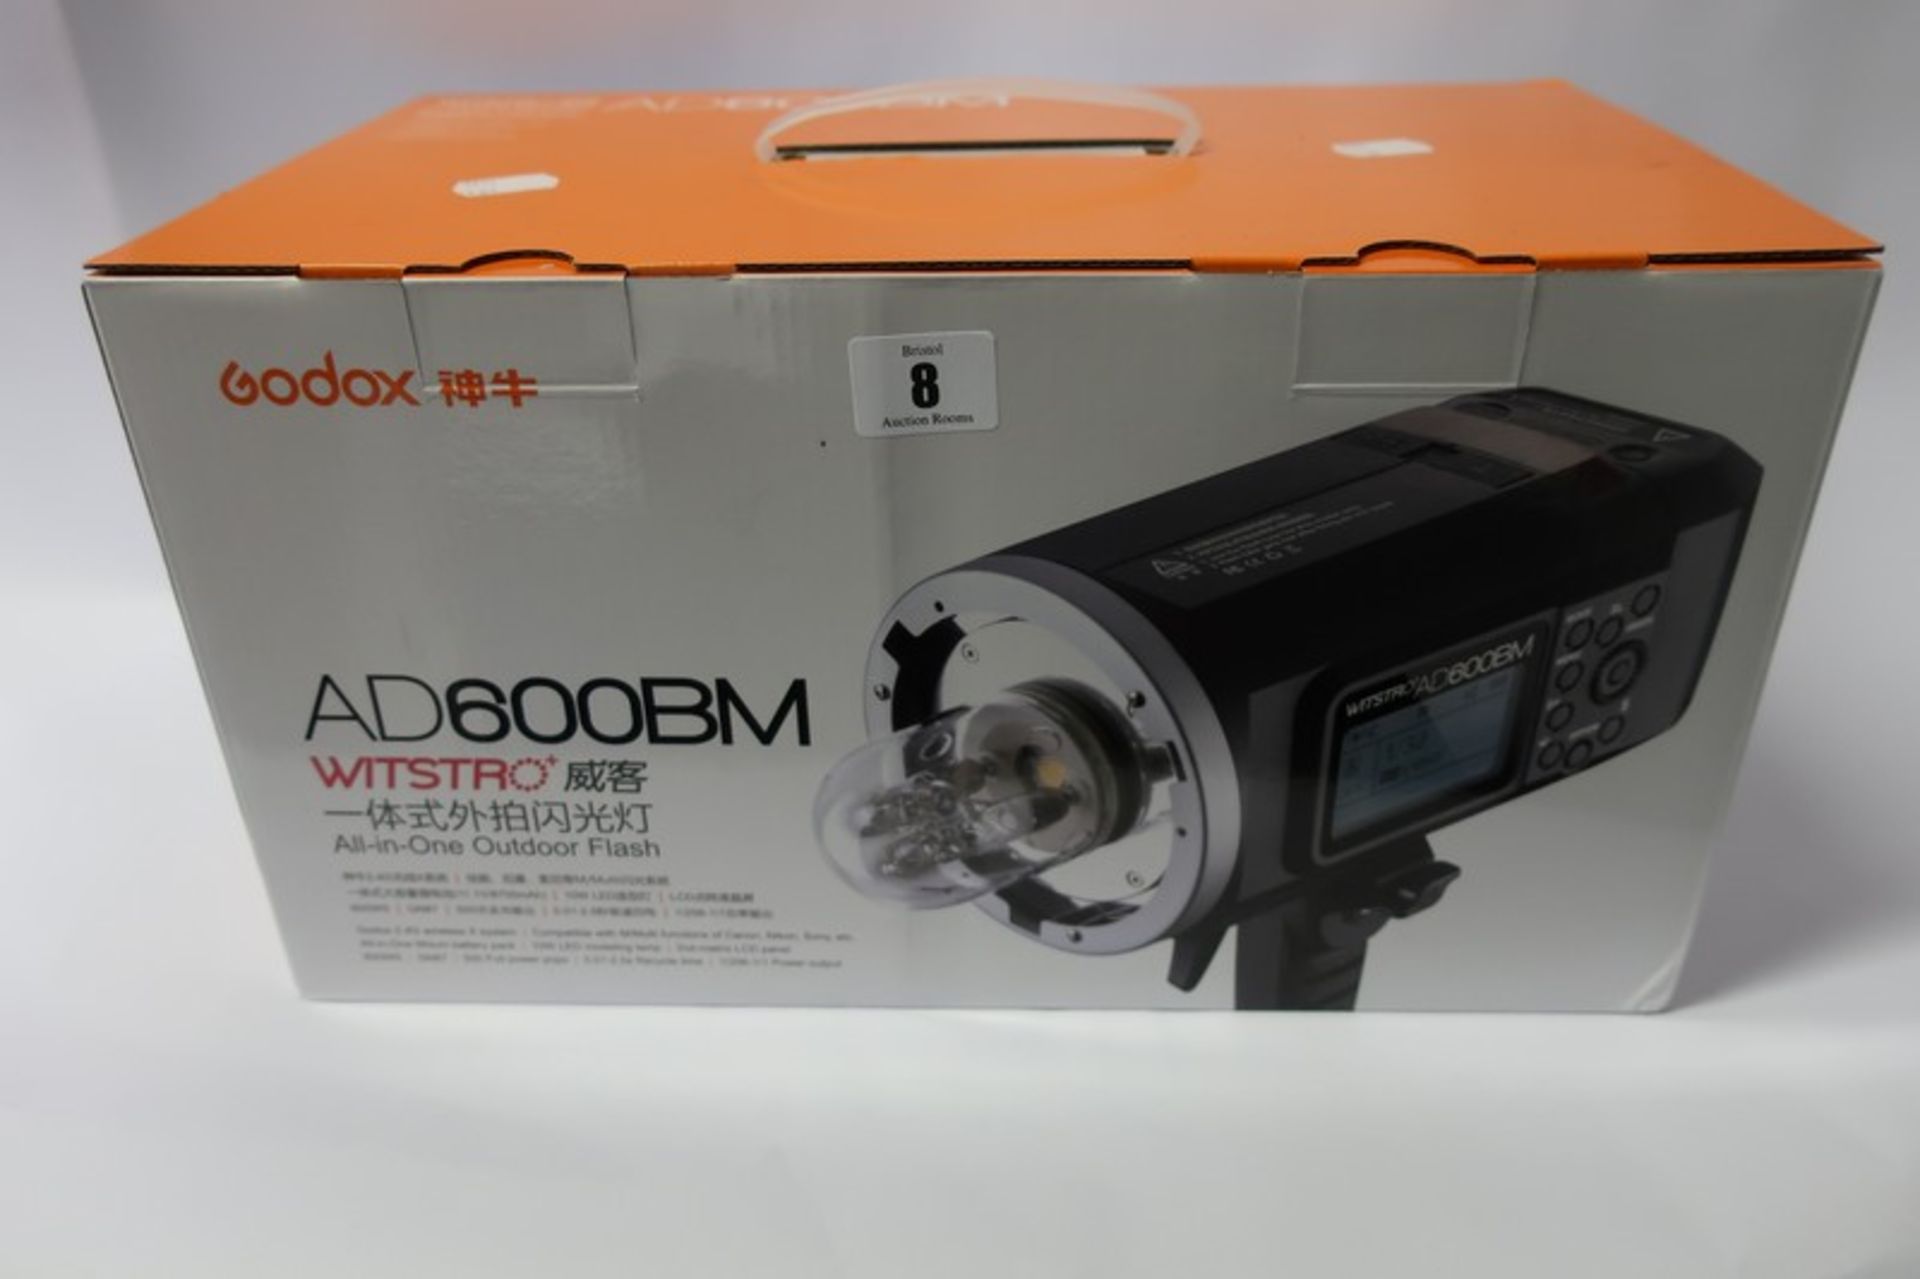 A boxed as new Godox AD600BM Witstro all in one outdoor flash.